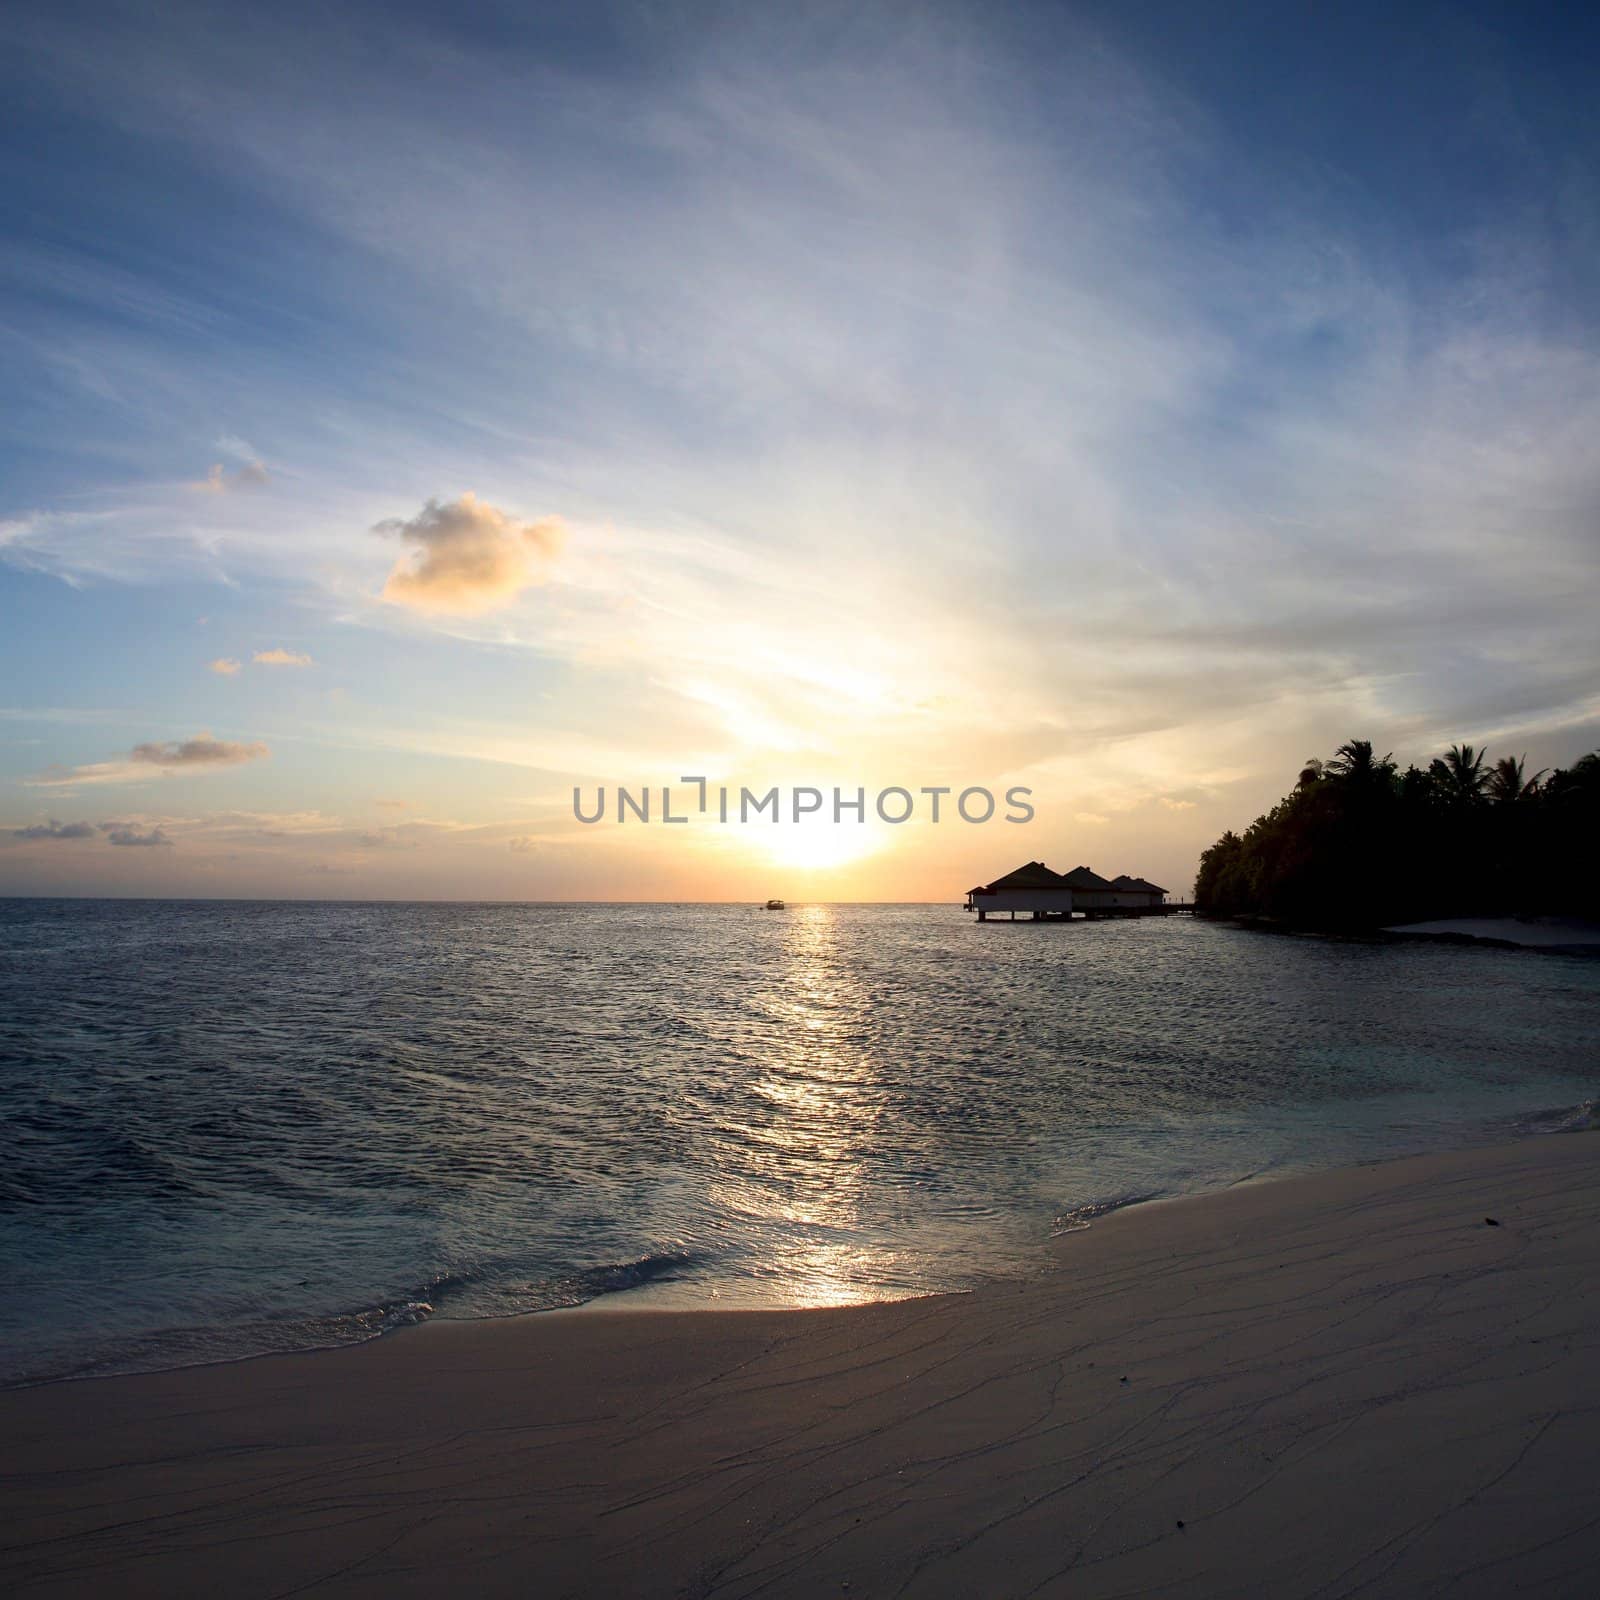 Sunrise early in the morning on the beach of Embudu in the Maldives